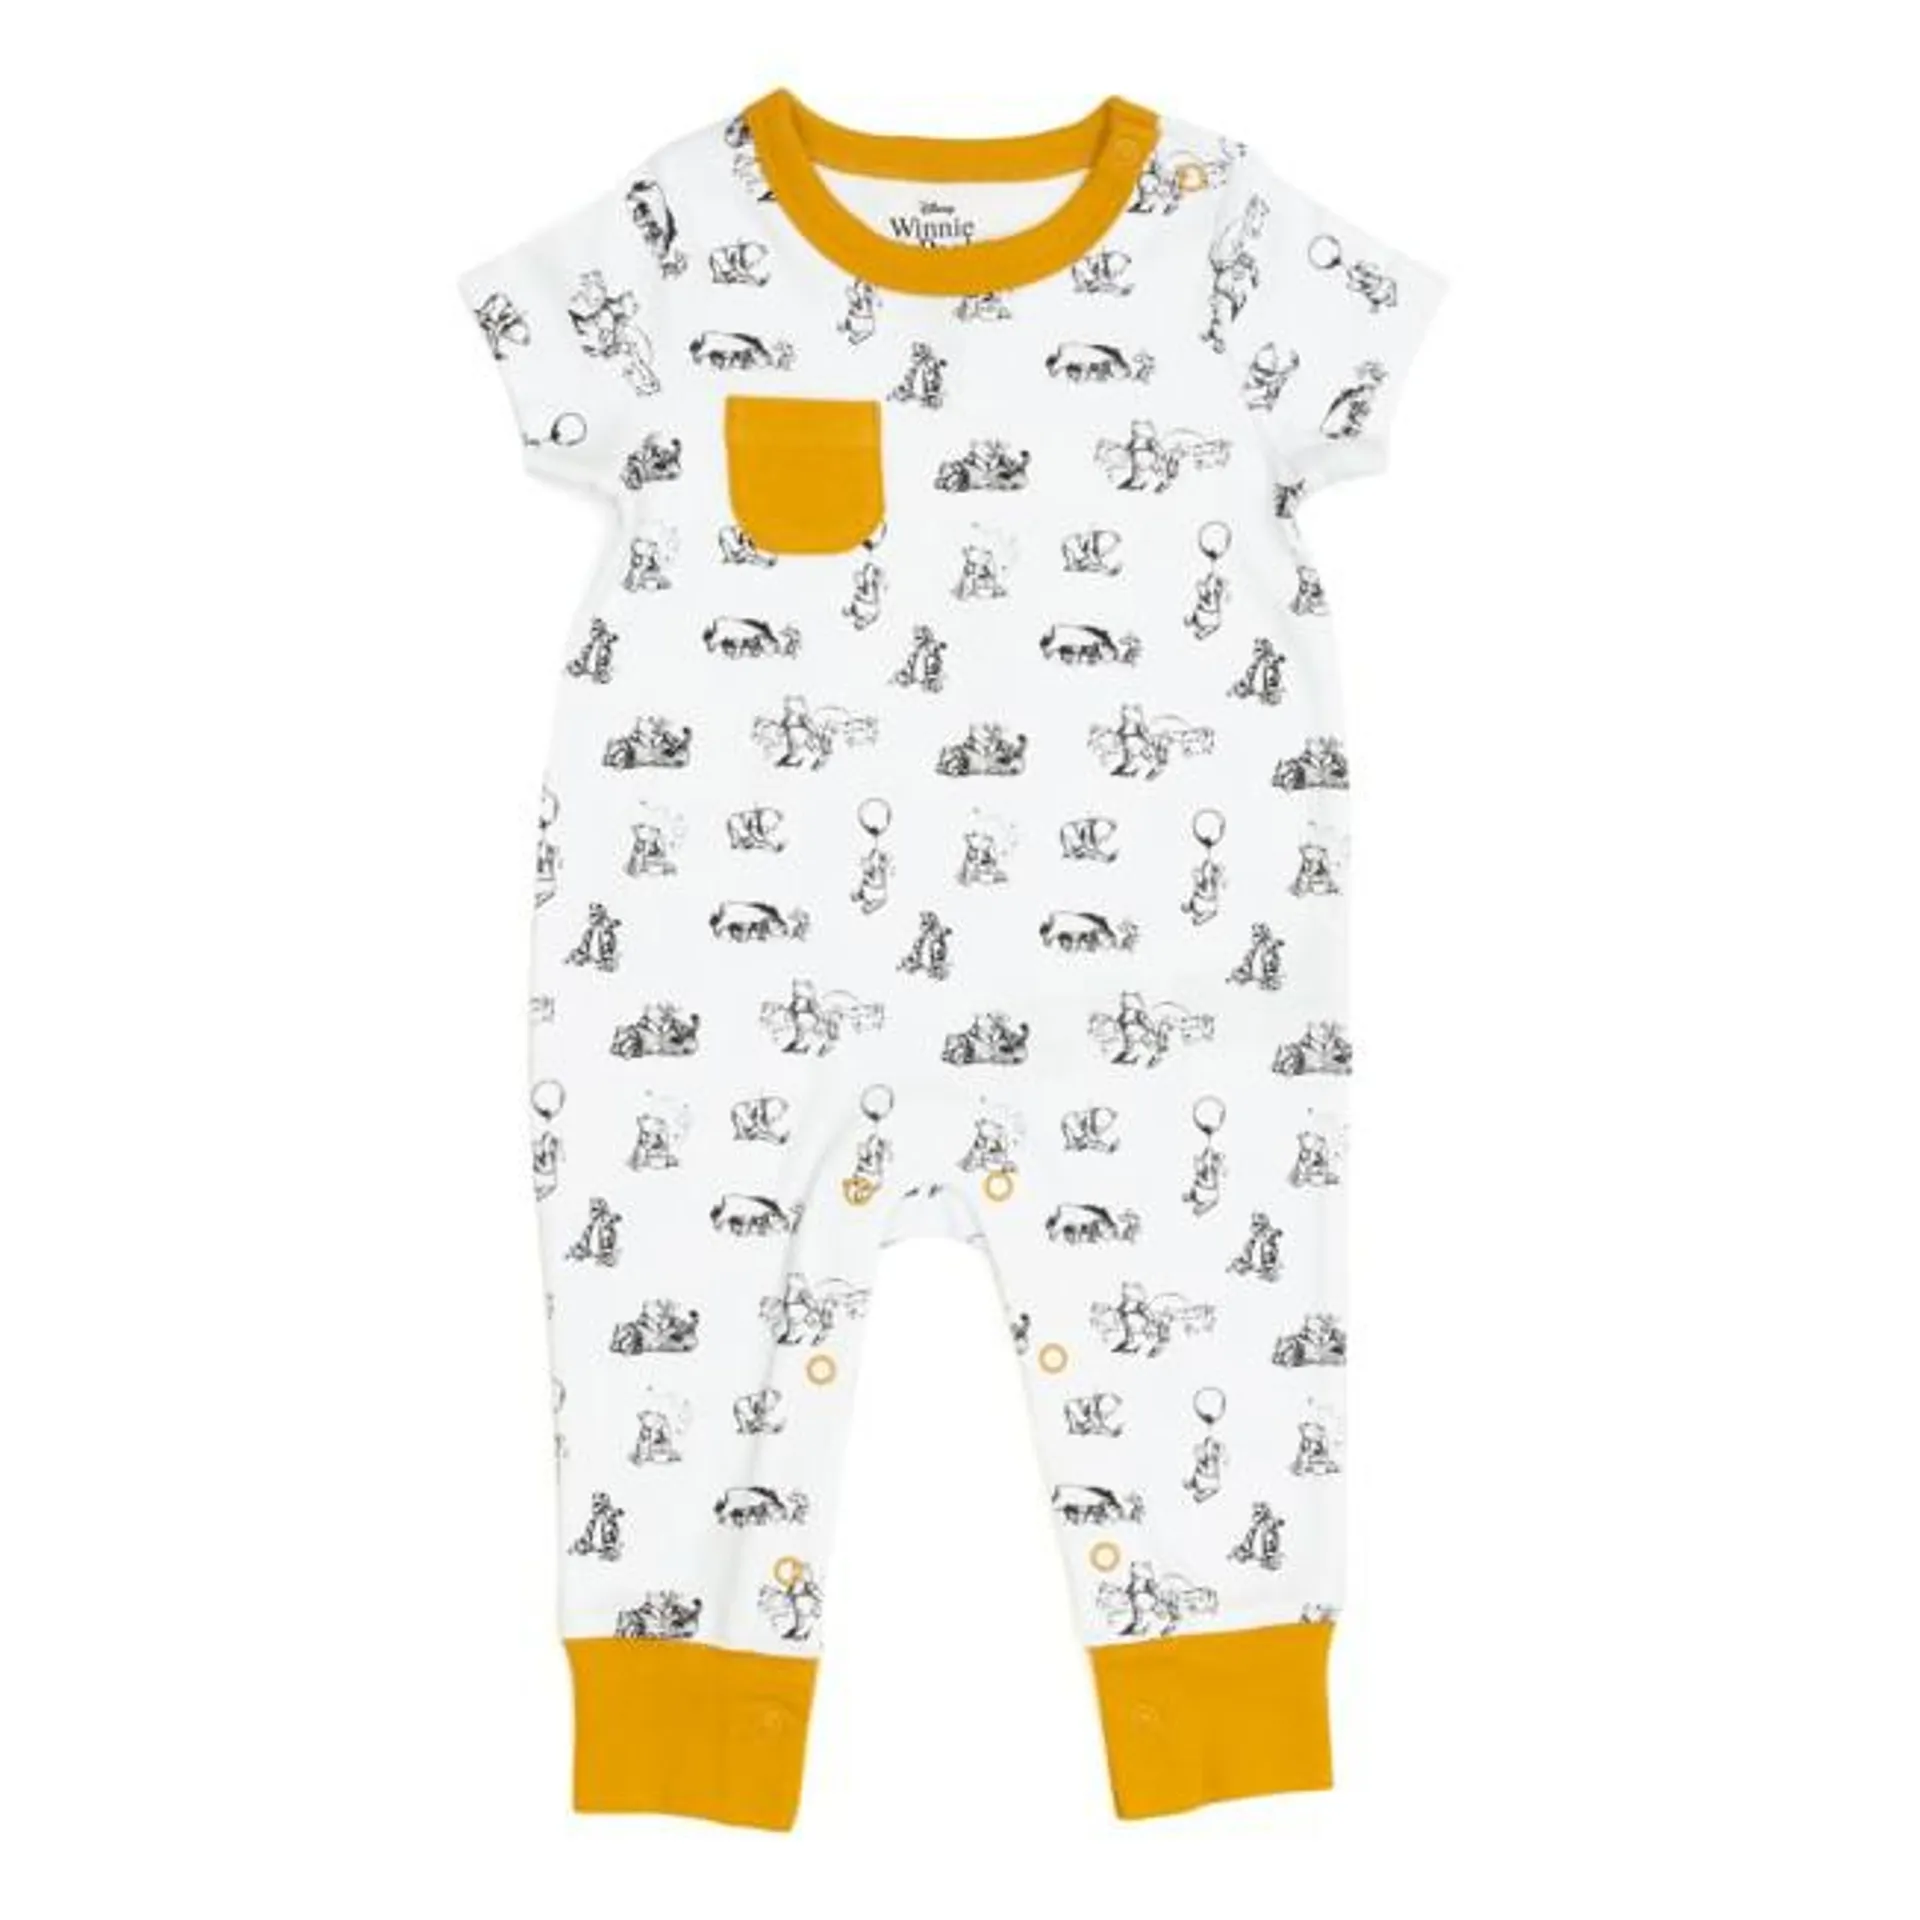 Disney Store Winnie the Pooh Baby All-in-One